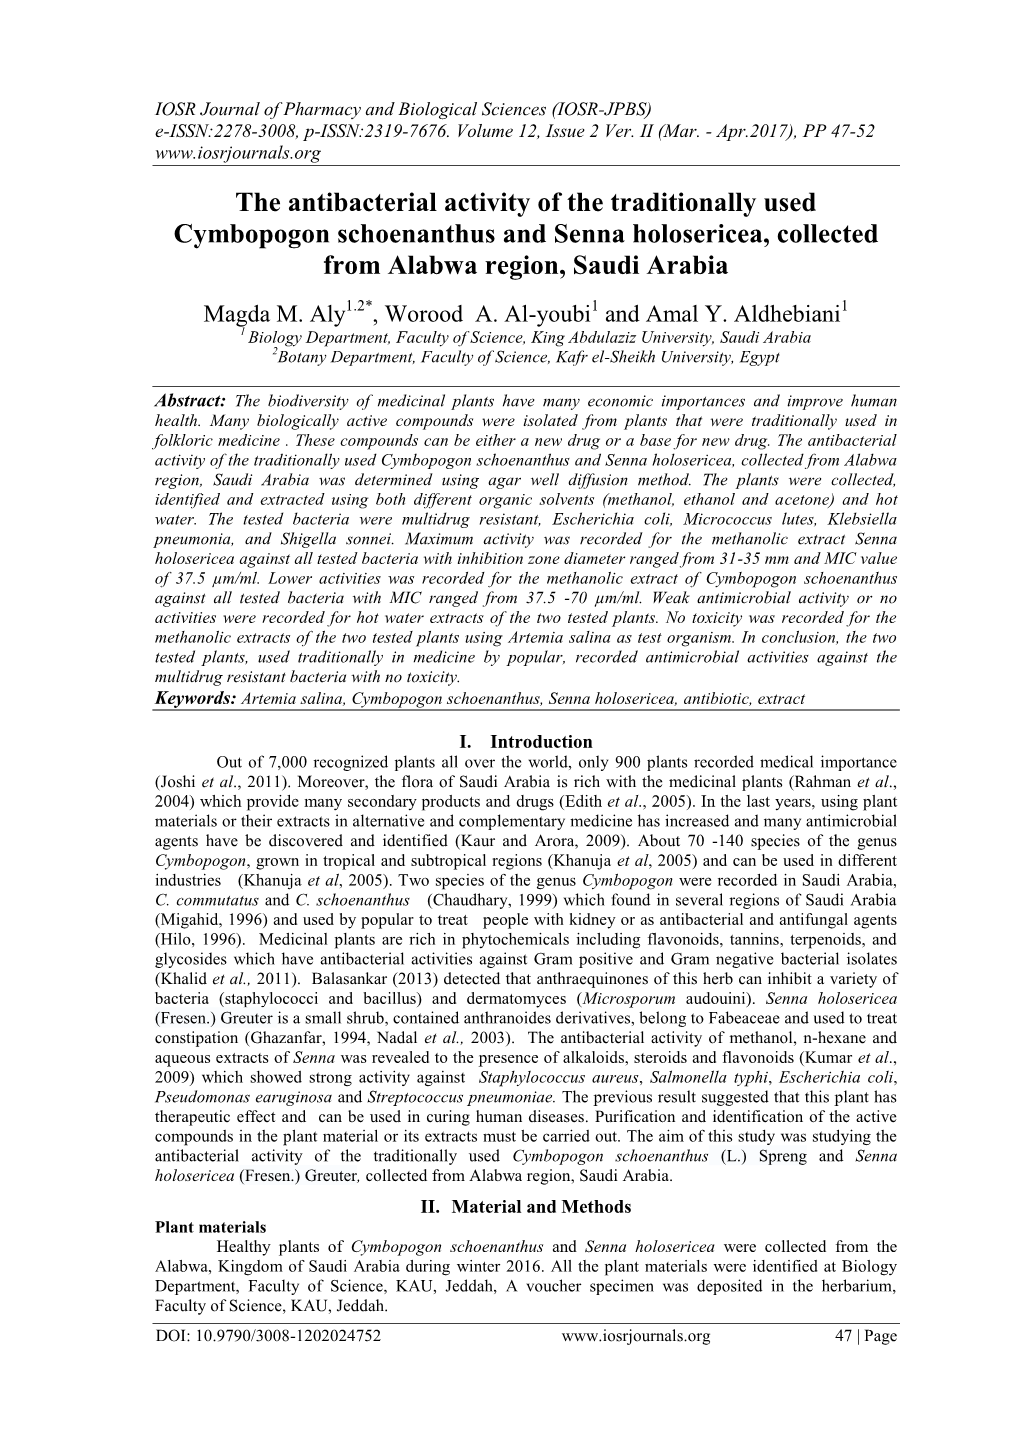 The Antibacterial Activity of the Traditionally Used Cymbopogon Schoenanthus and Senna Holosericea, Collected from Alabwa Region, Saudi Arabia